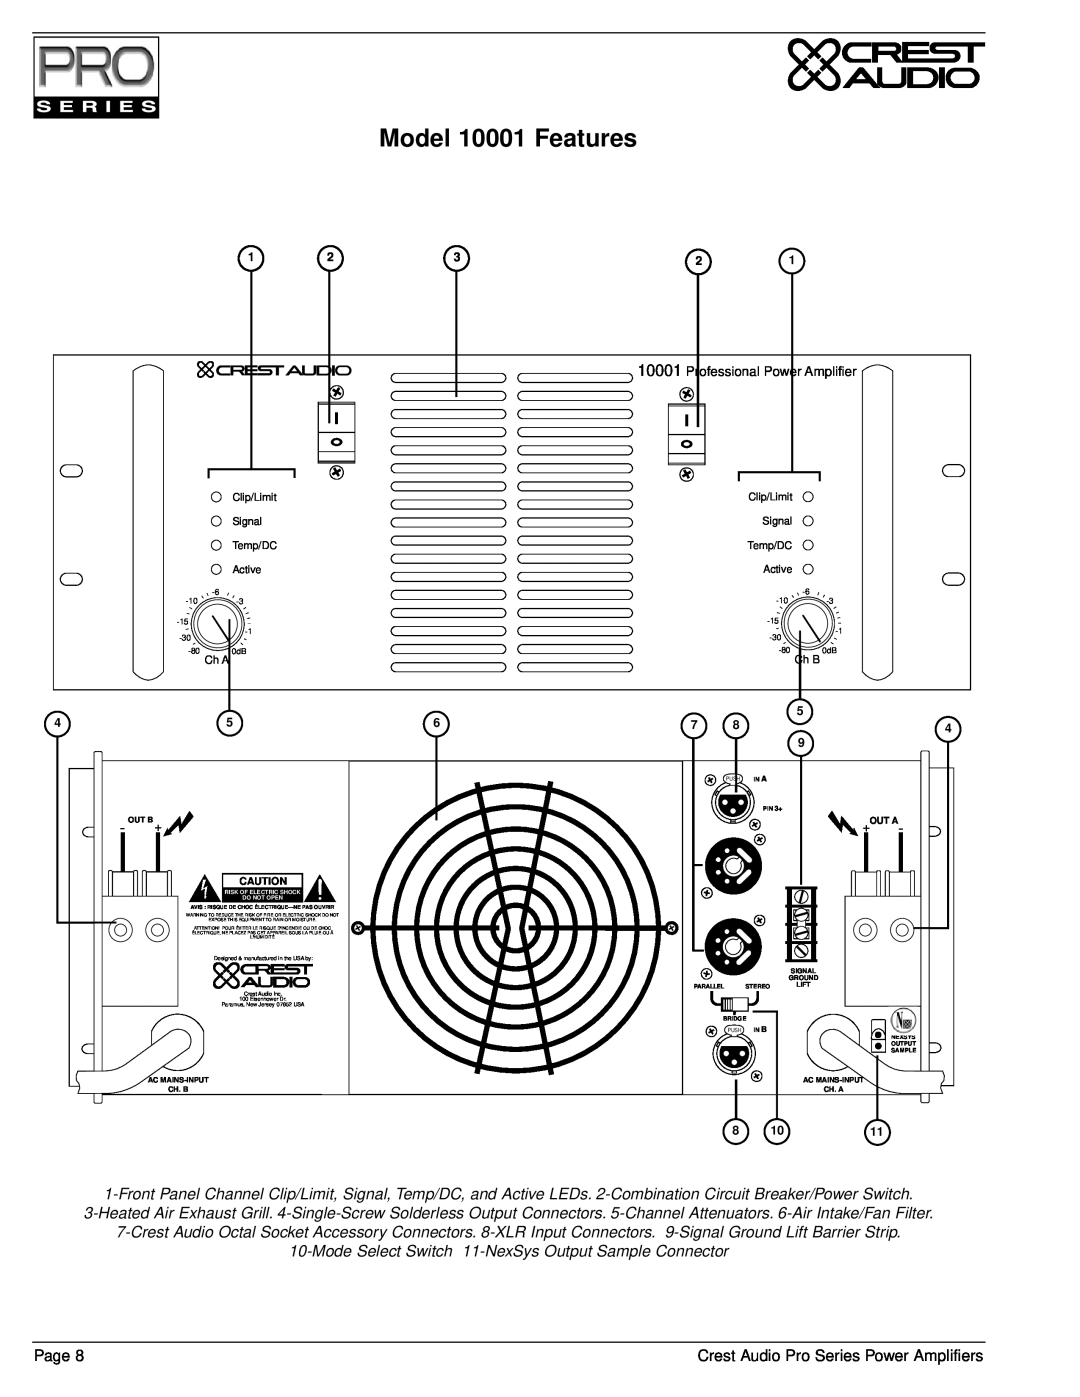 Crest Audio Stereo Amplifier owner manual Model 10001 Features, Professional Power Amplifier 